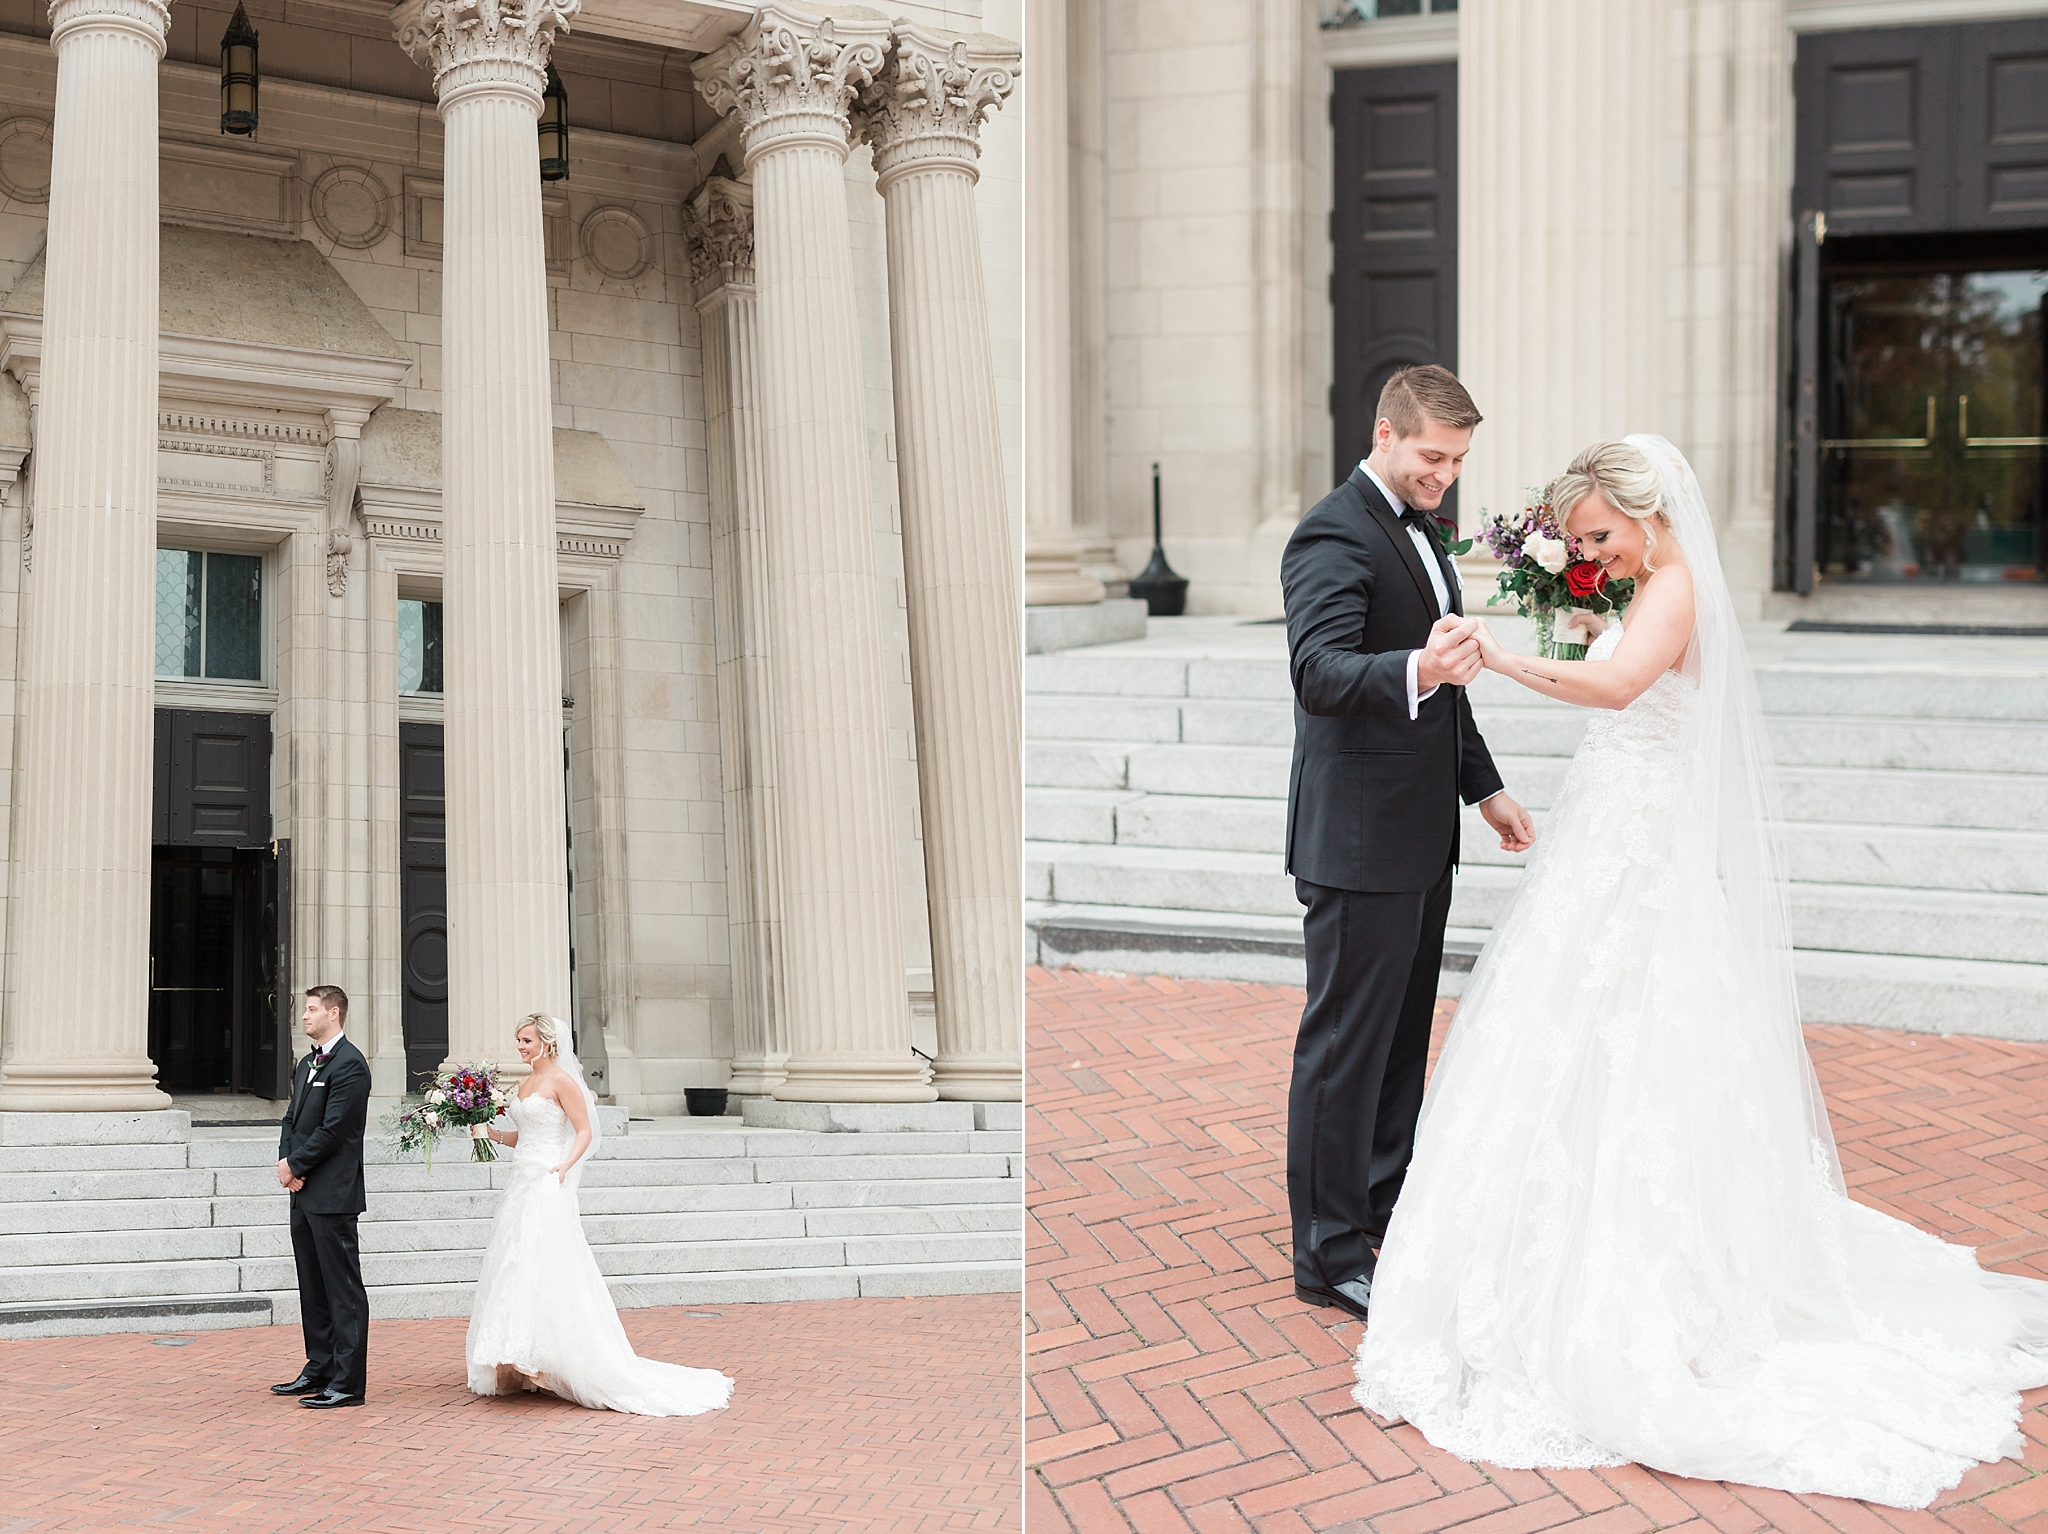 Washington, DC wedding photographer, Alicia Lacey, takes a look back on the best first looks of 2016.